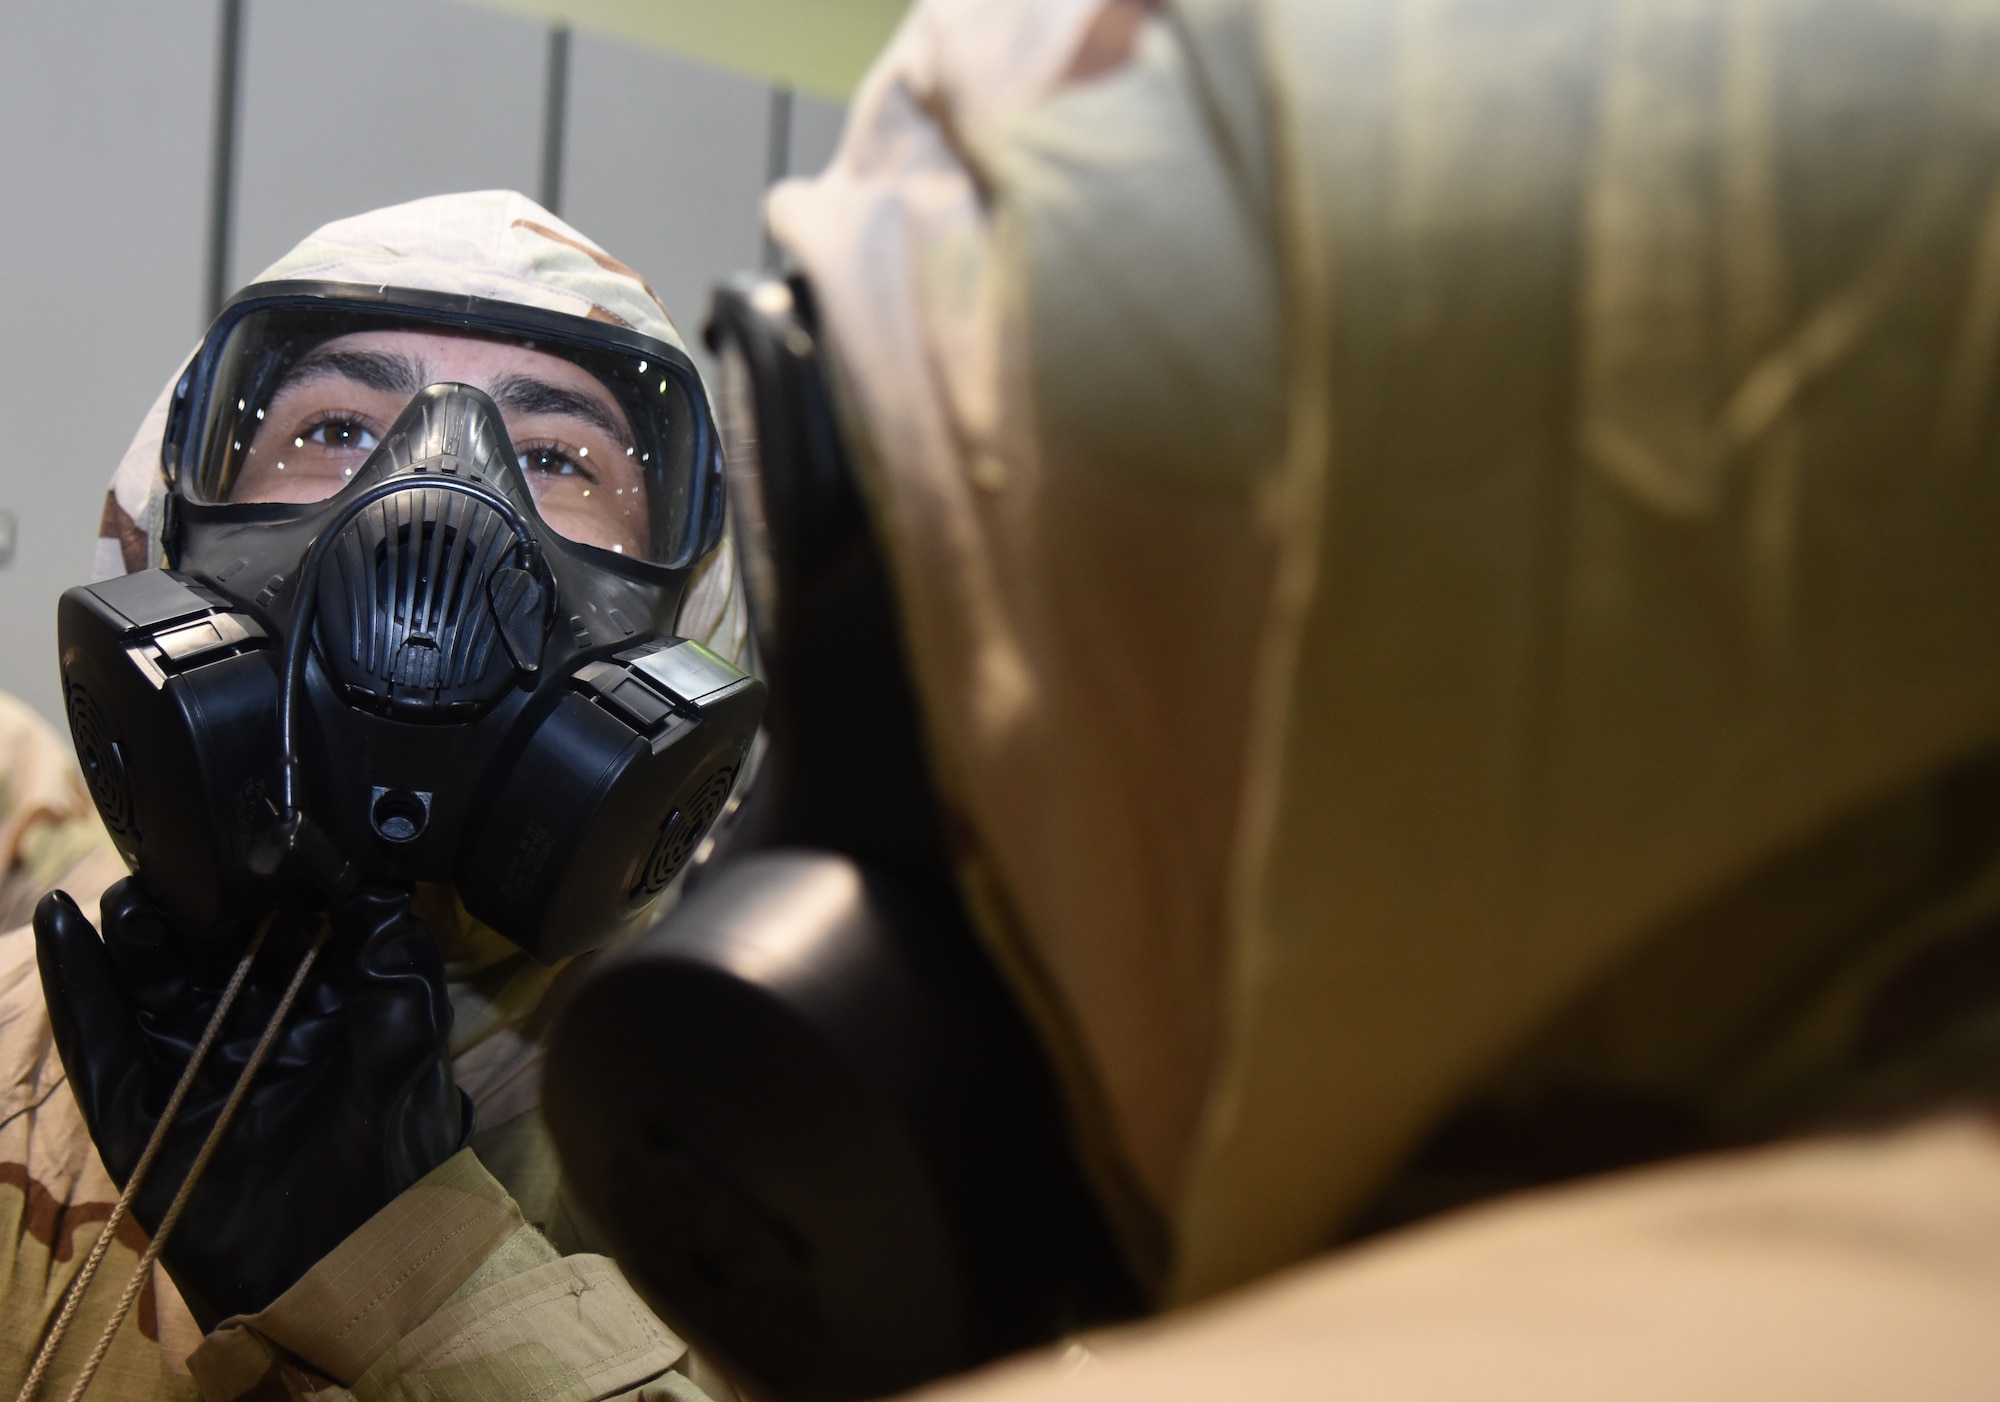 The 9th Medical Group trained for potential deployment conditions with several mock exercises and simulated medical emergencies on base, March 6, 2019.